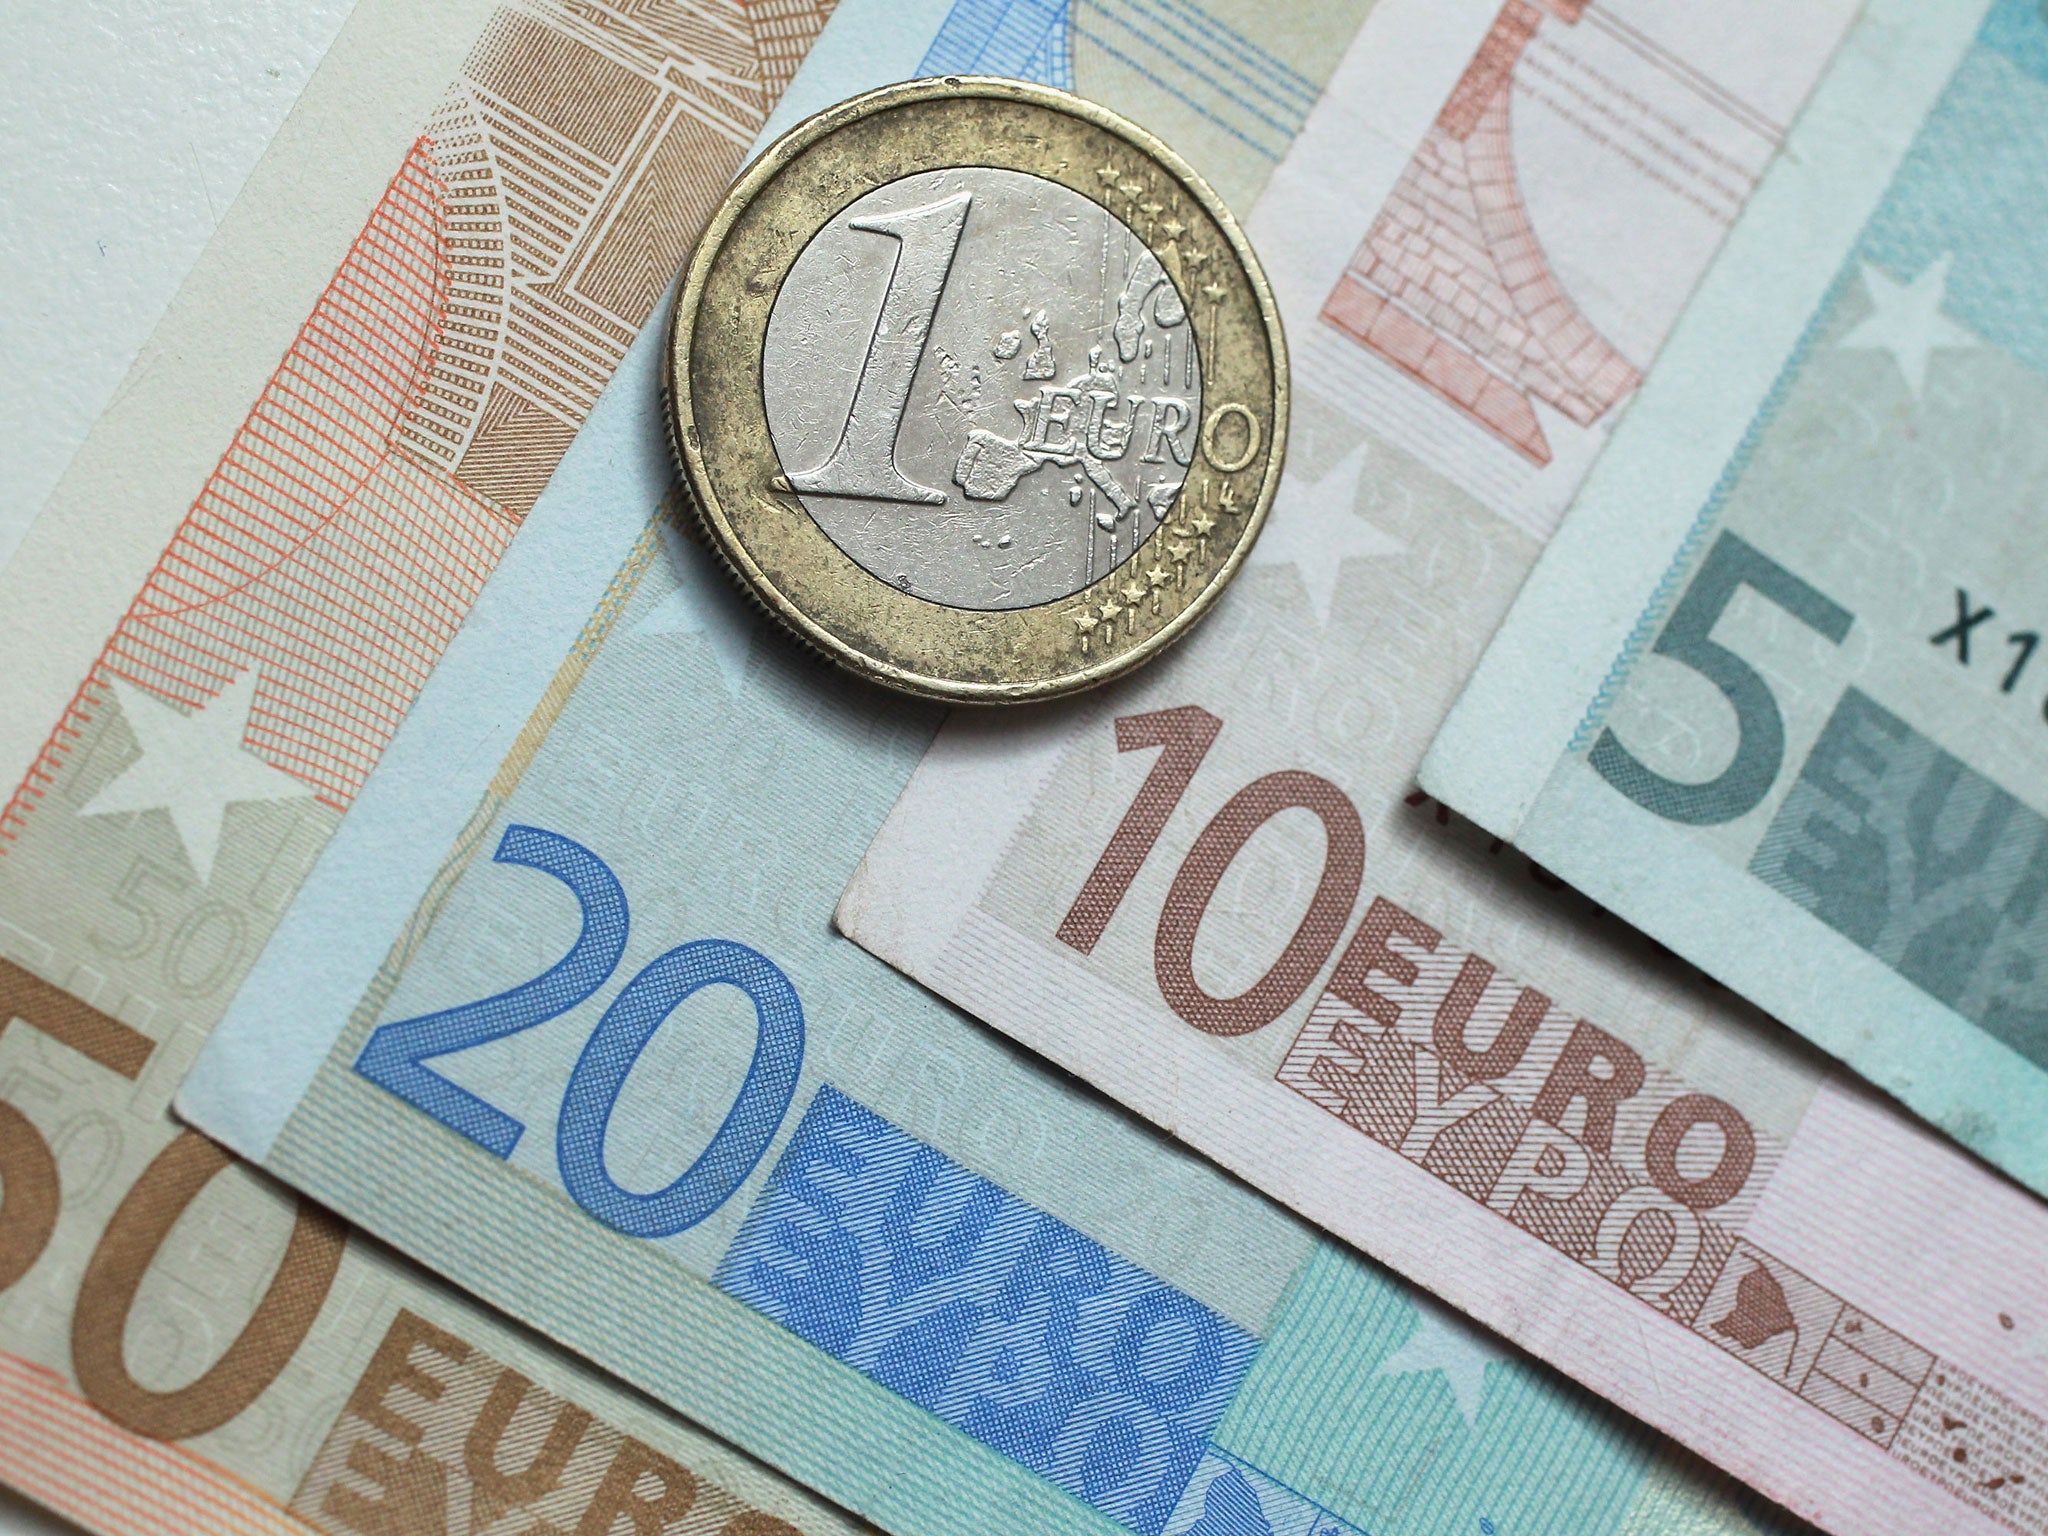 A report said the German Government no longer believes it would be too risky for the 19-member Eurozone if Greece dropped the currency